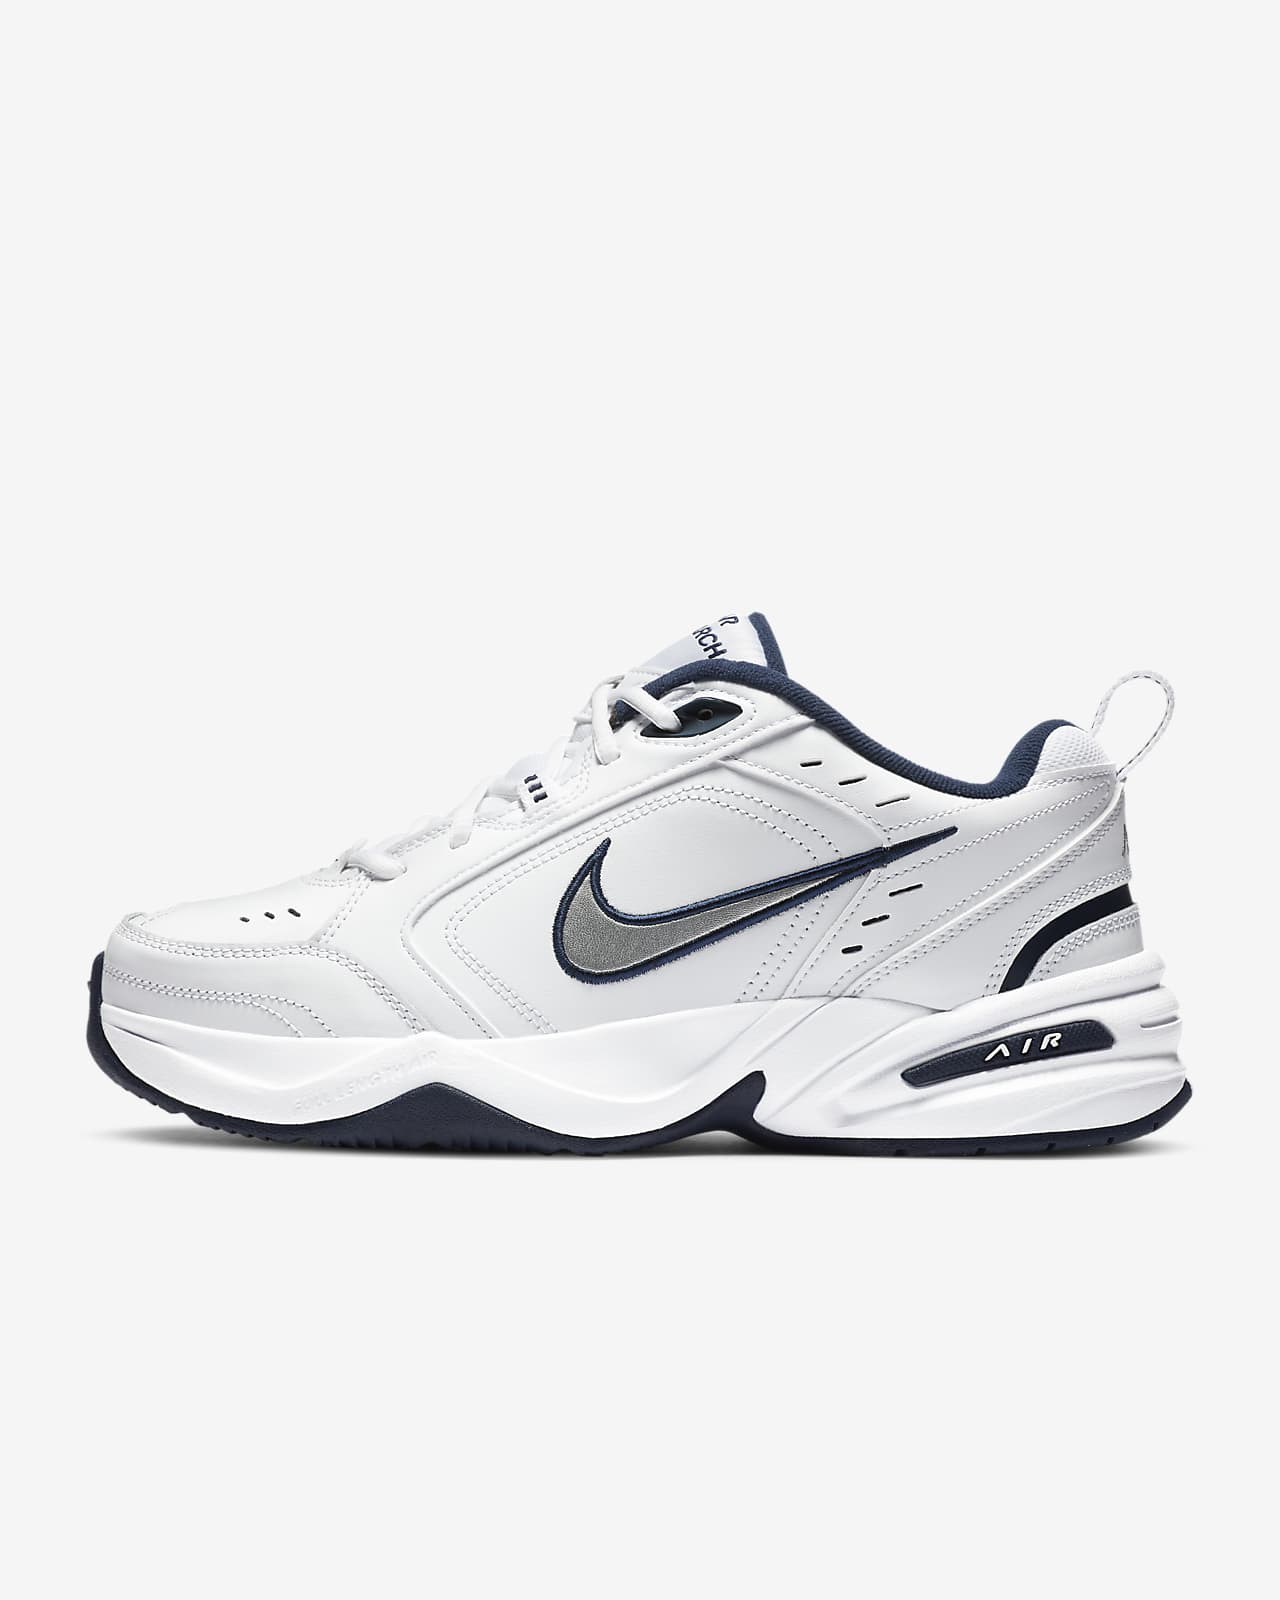 nike cp contact number